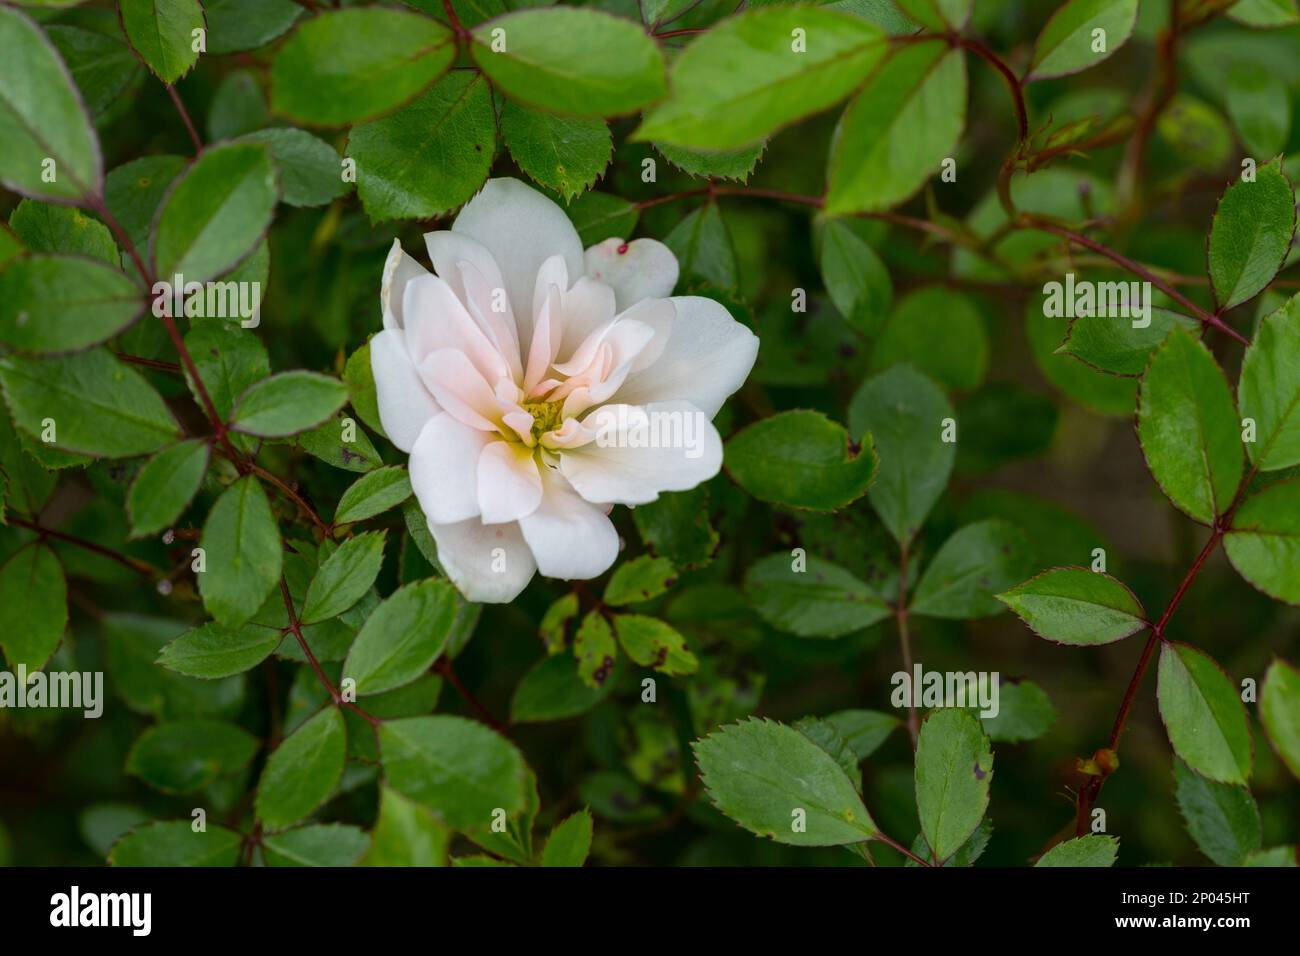 beautiful white rose on a bush among green leaves, a setective focus Stock Photo